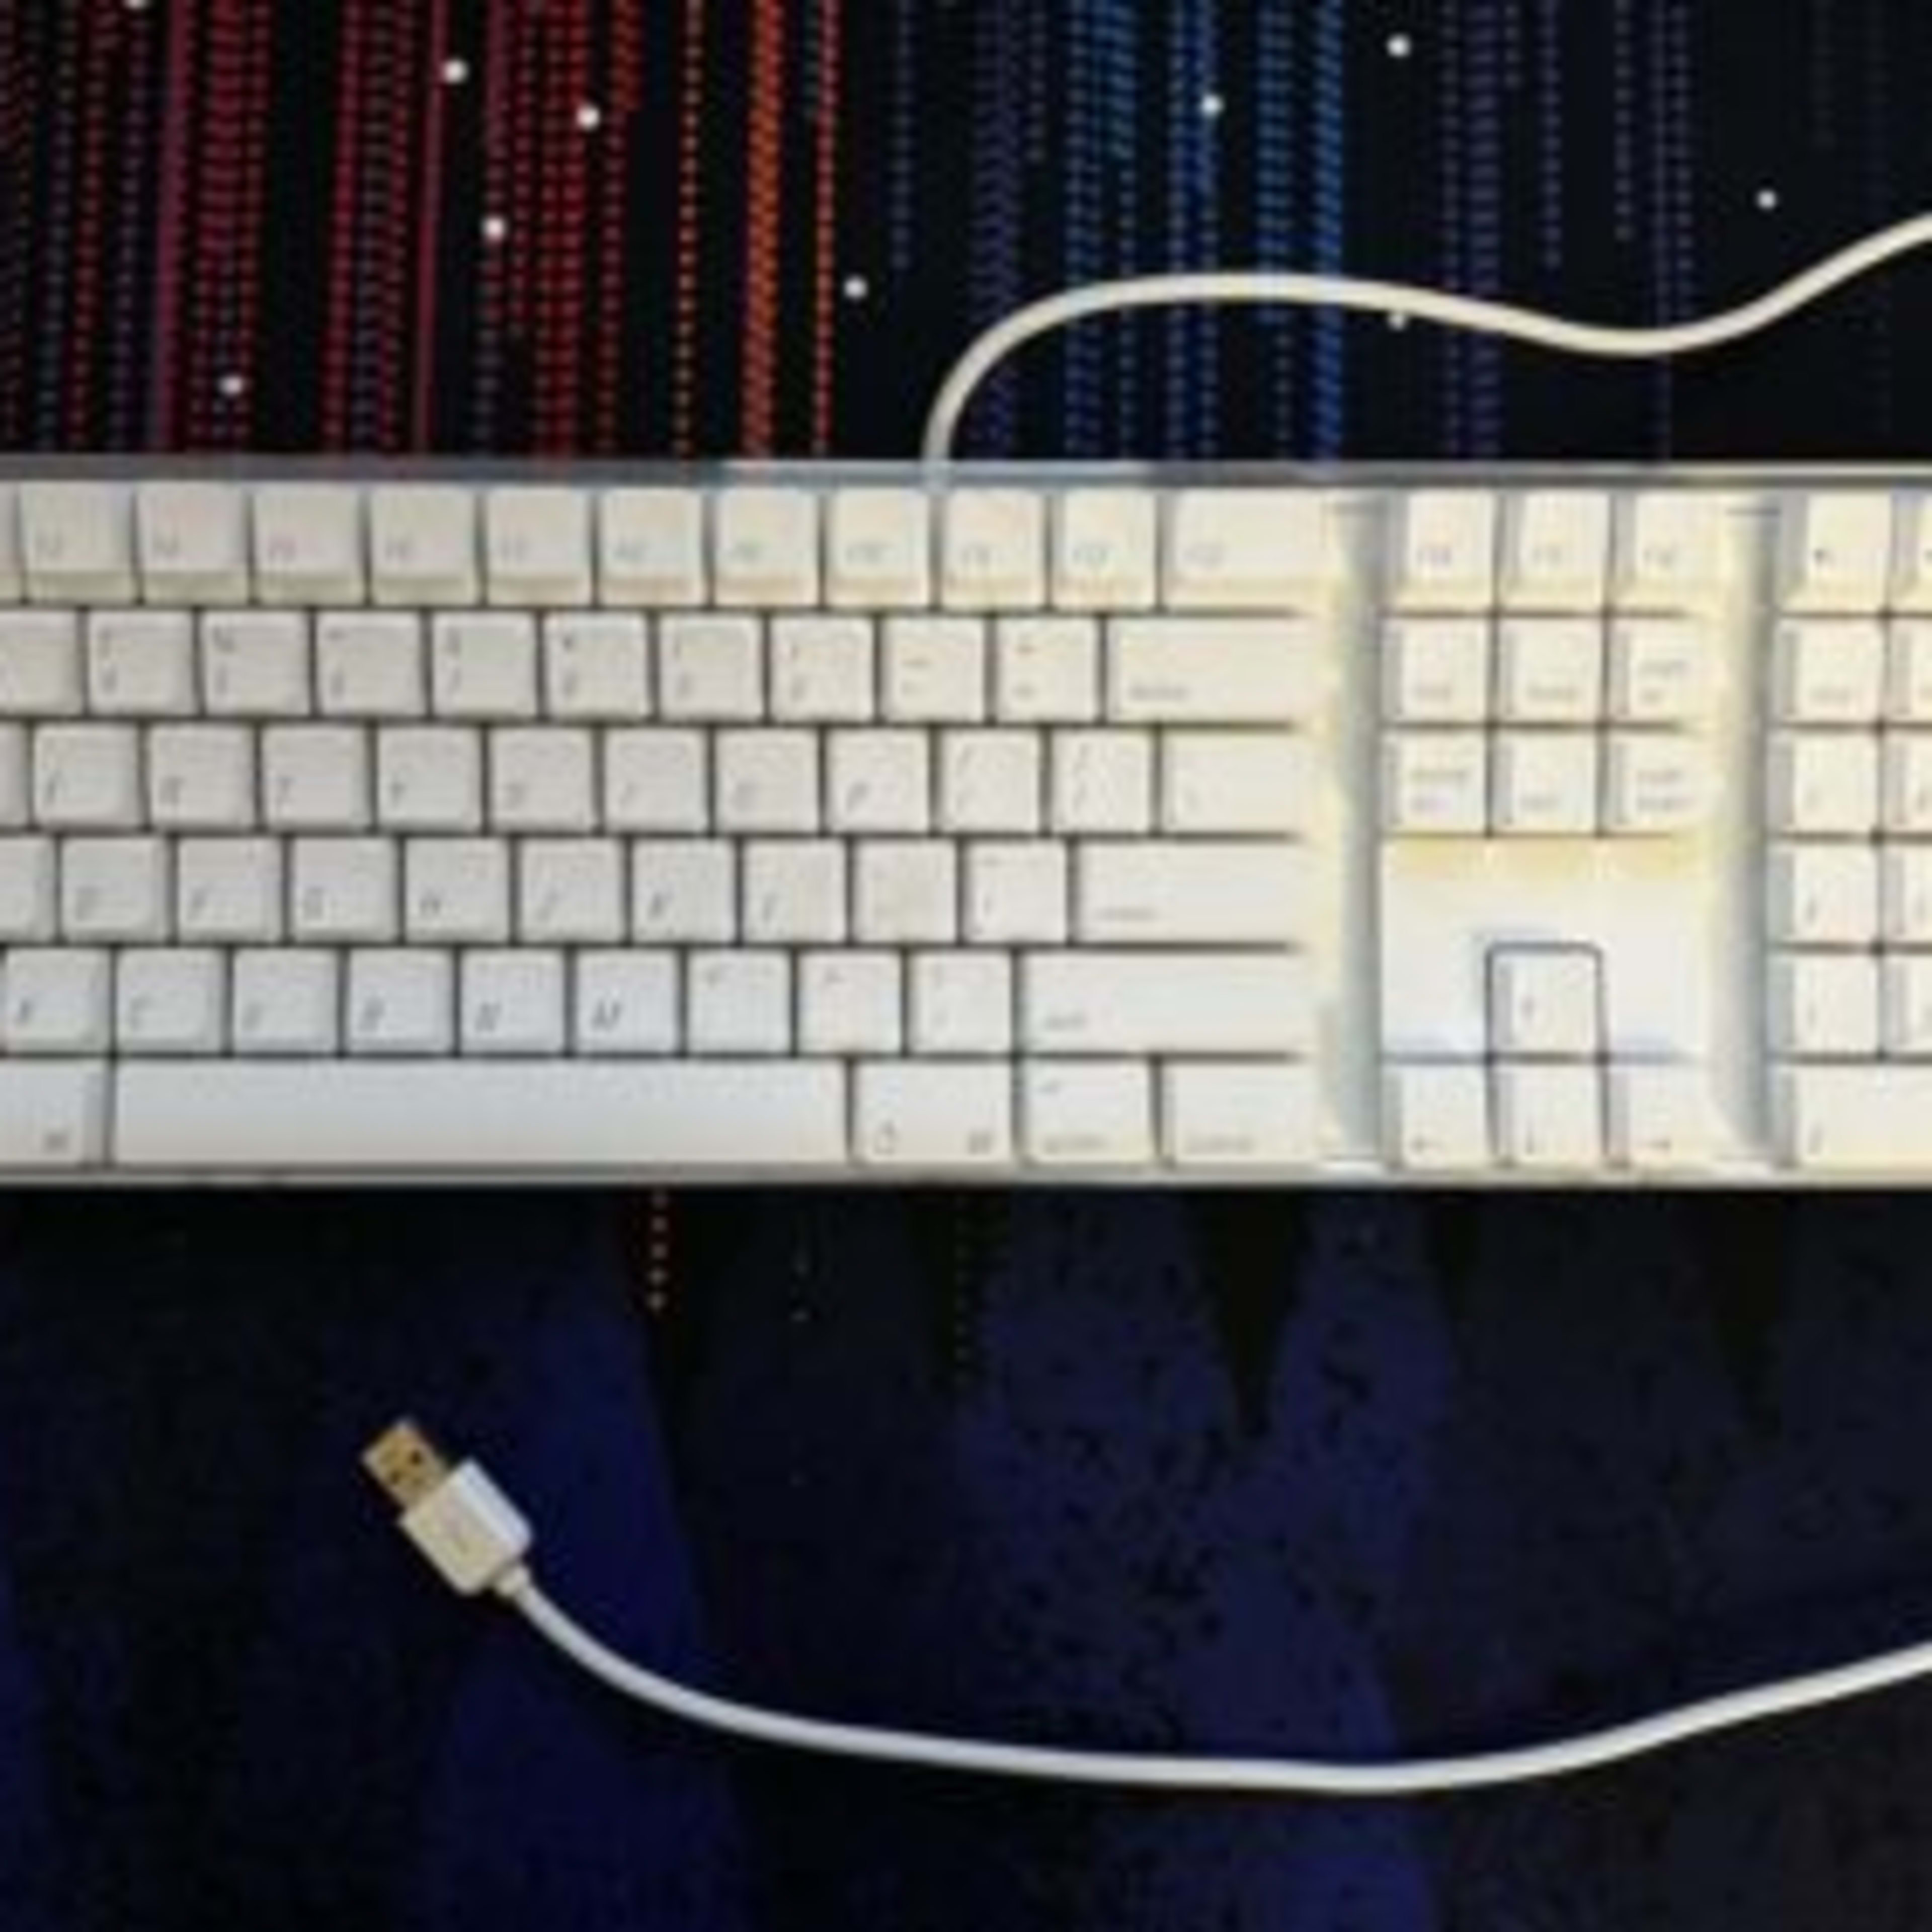 Apple OEM Wired Dual USB Keyboard Model A1048 White 2003 Tested 